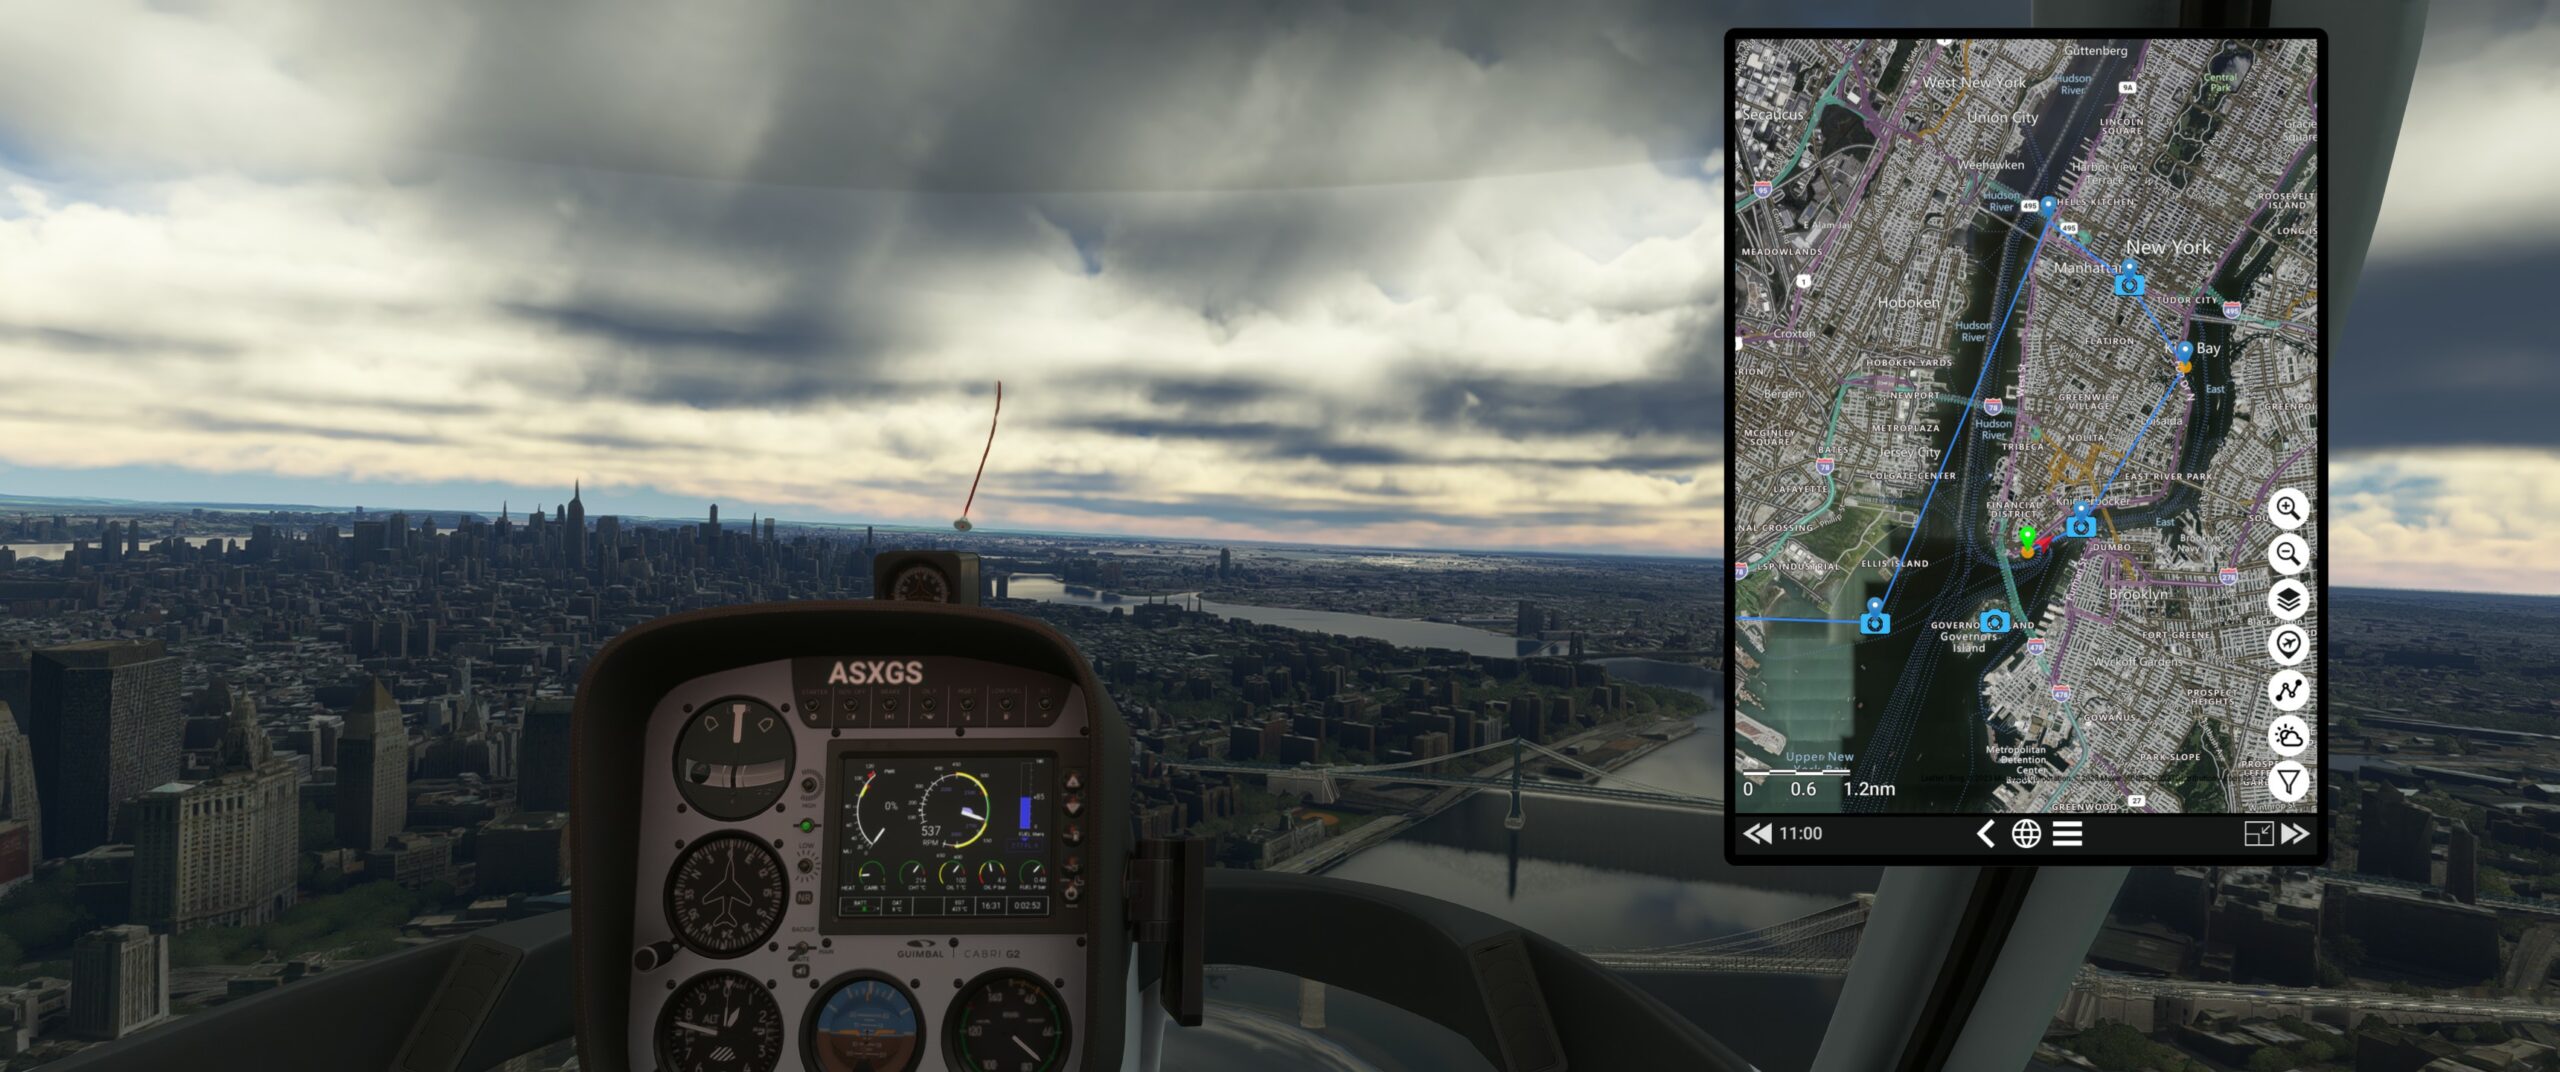 Sky4Sim addon – New update available! – 1.6.1.0